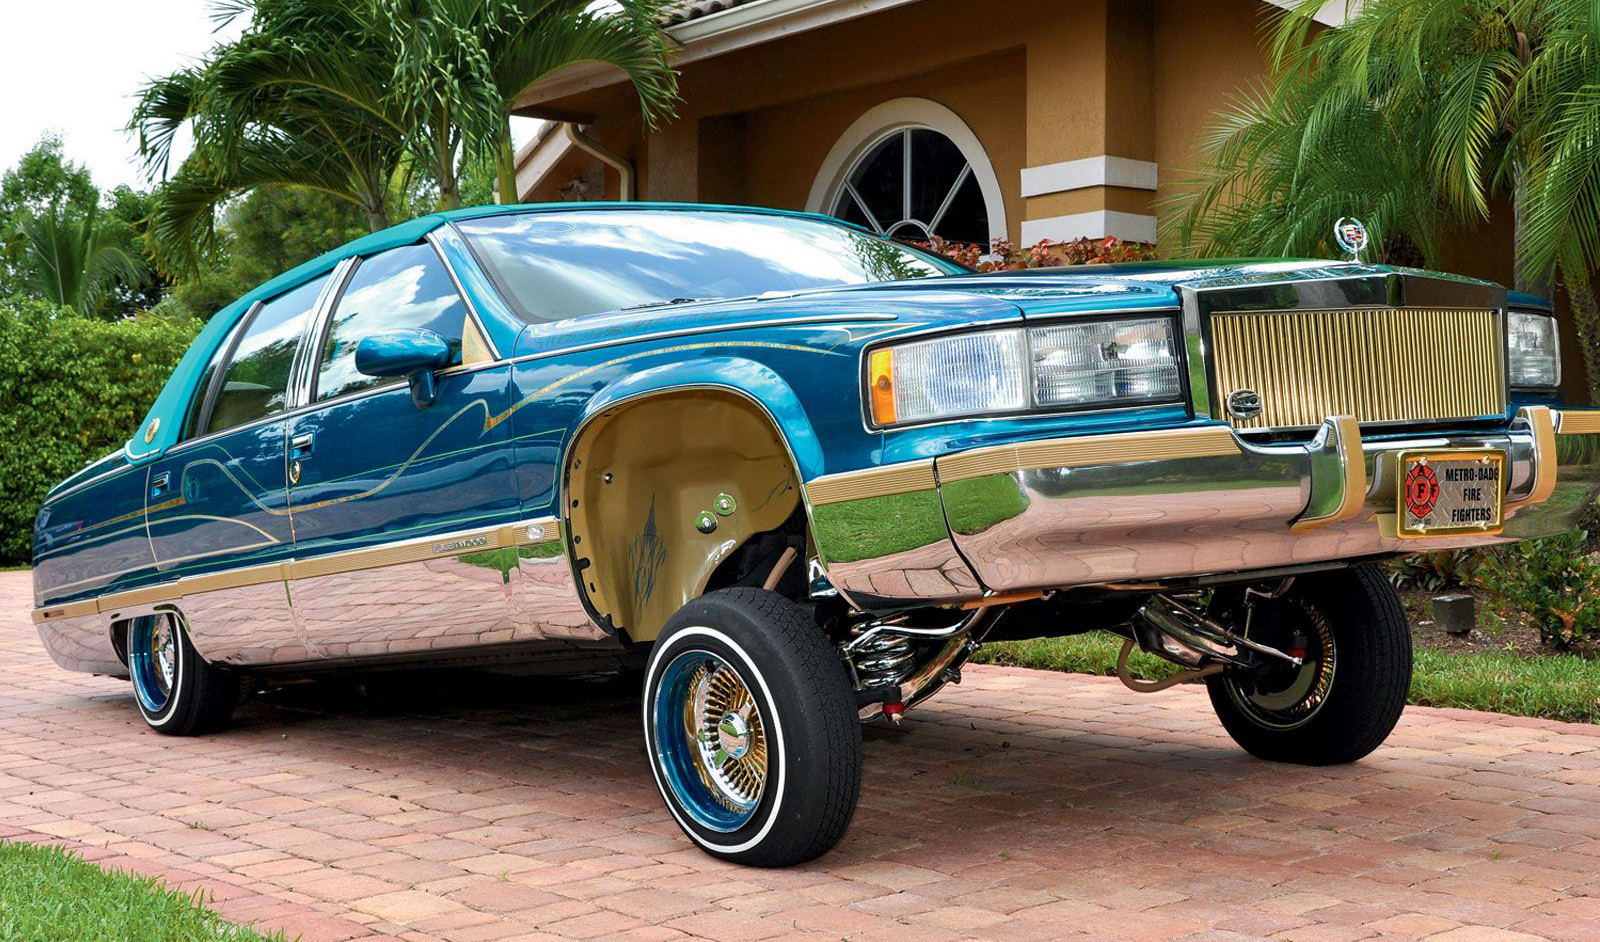 Amazing Lowrider Pictures & Backgrounds